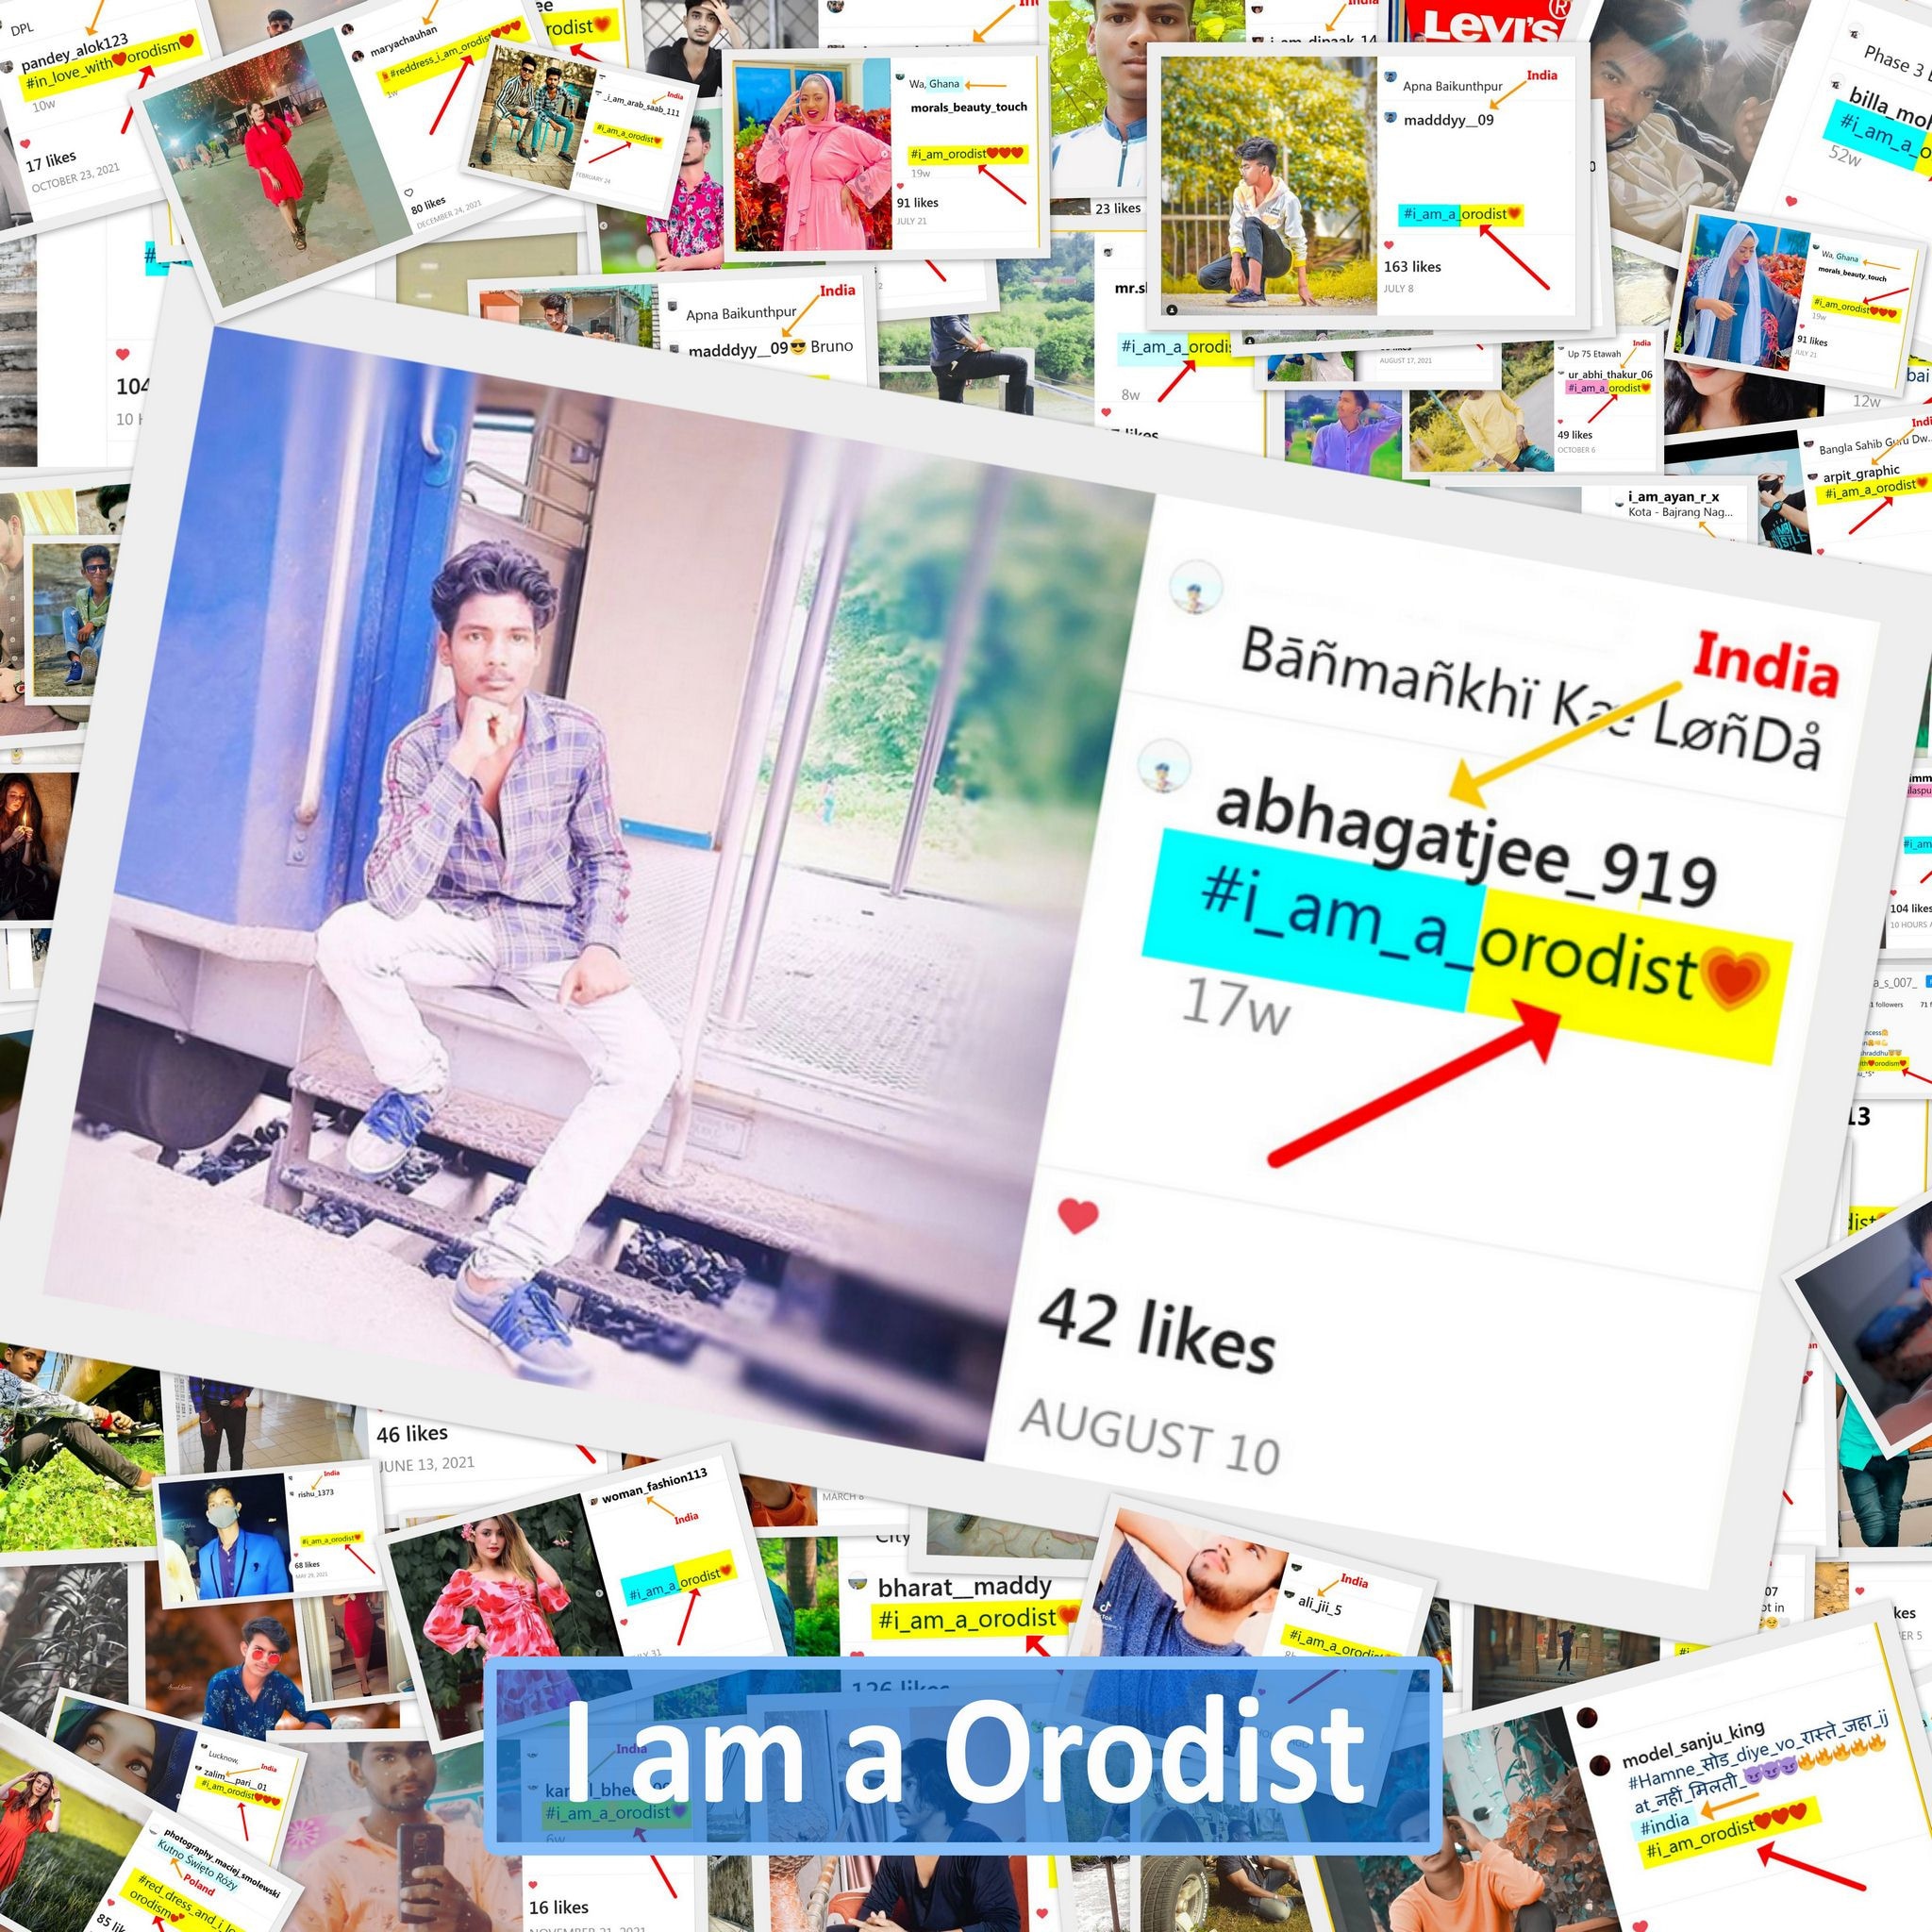  The philosophy of Orodism in India 3d22d0a576a170e0e10230898224a50f